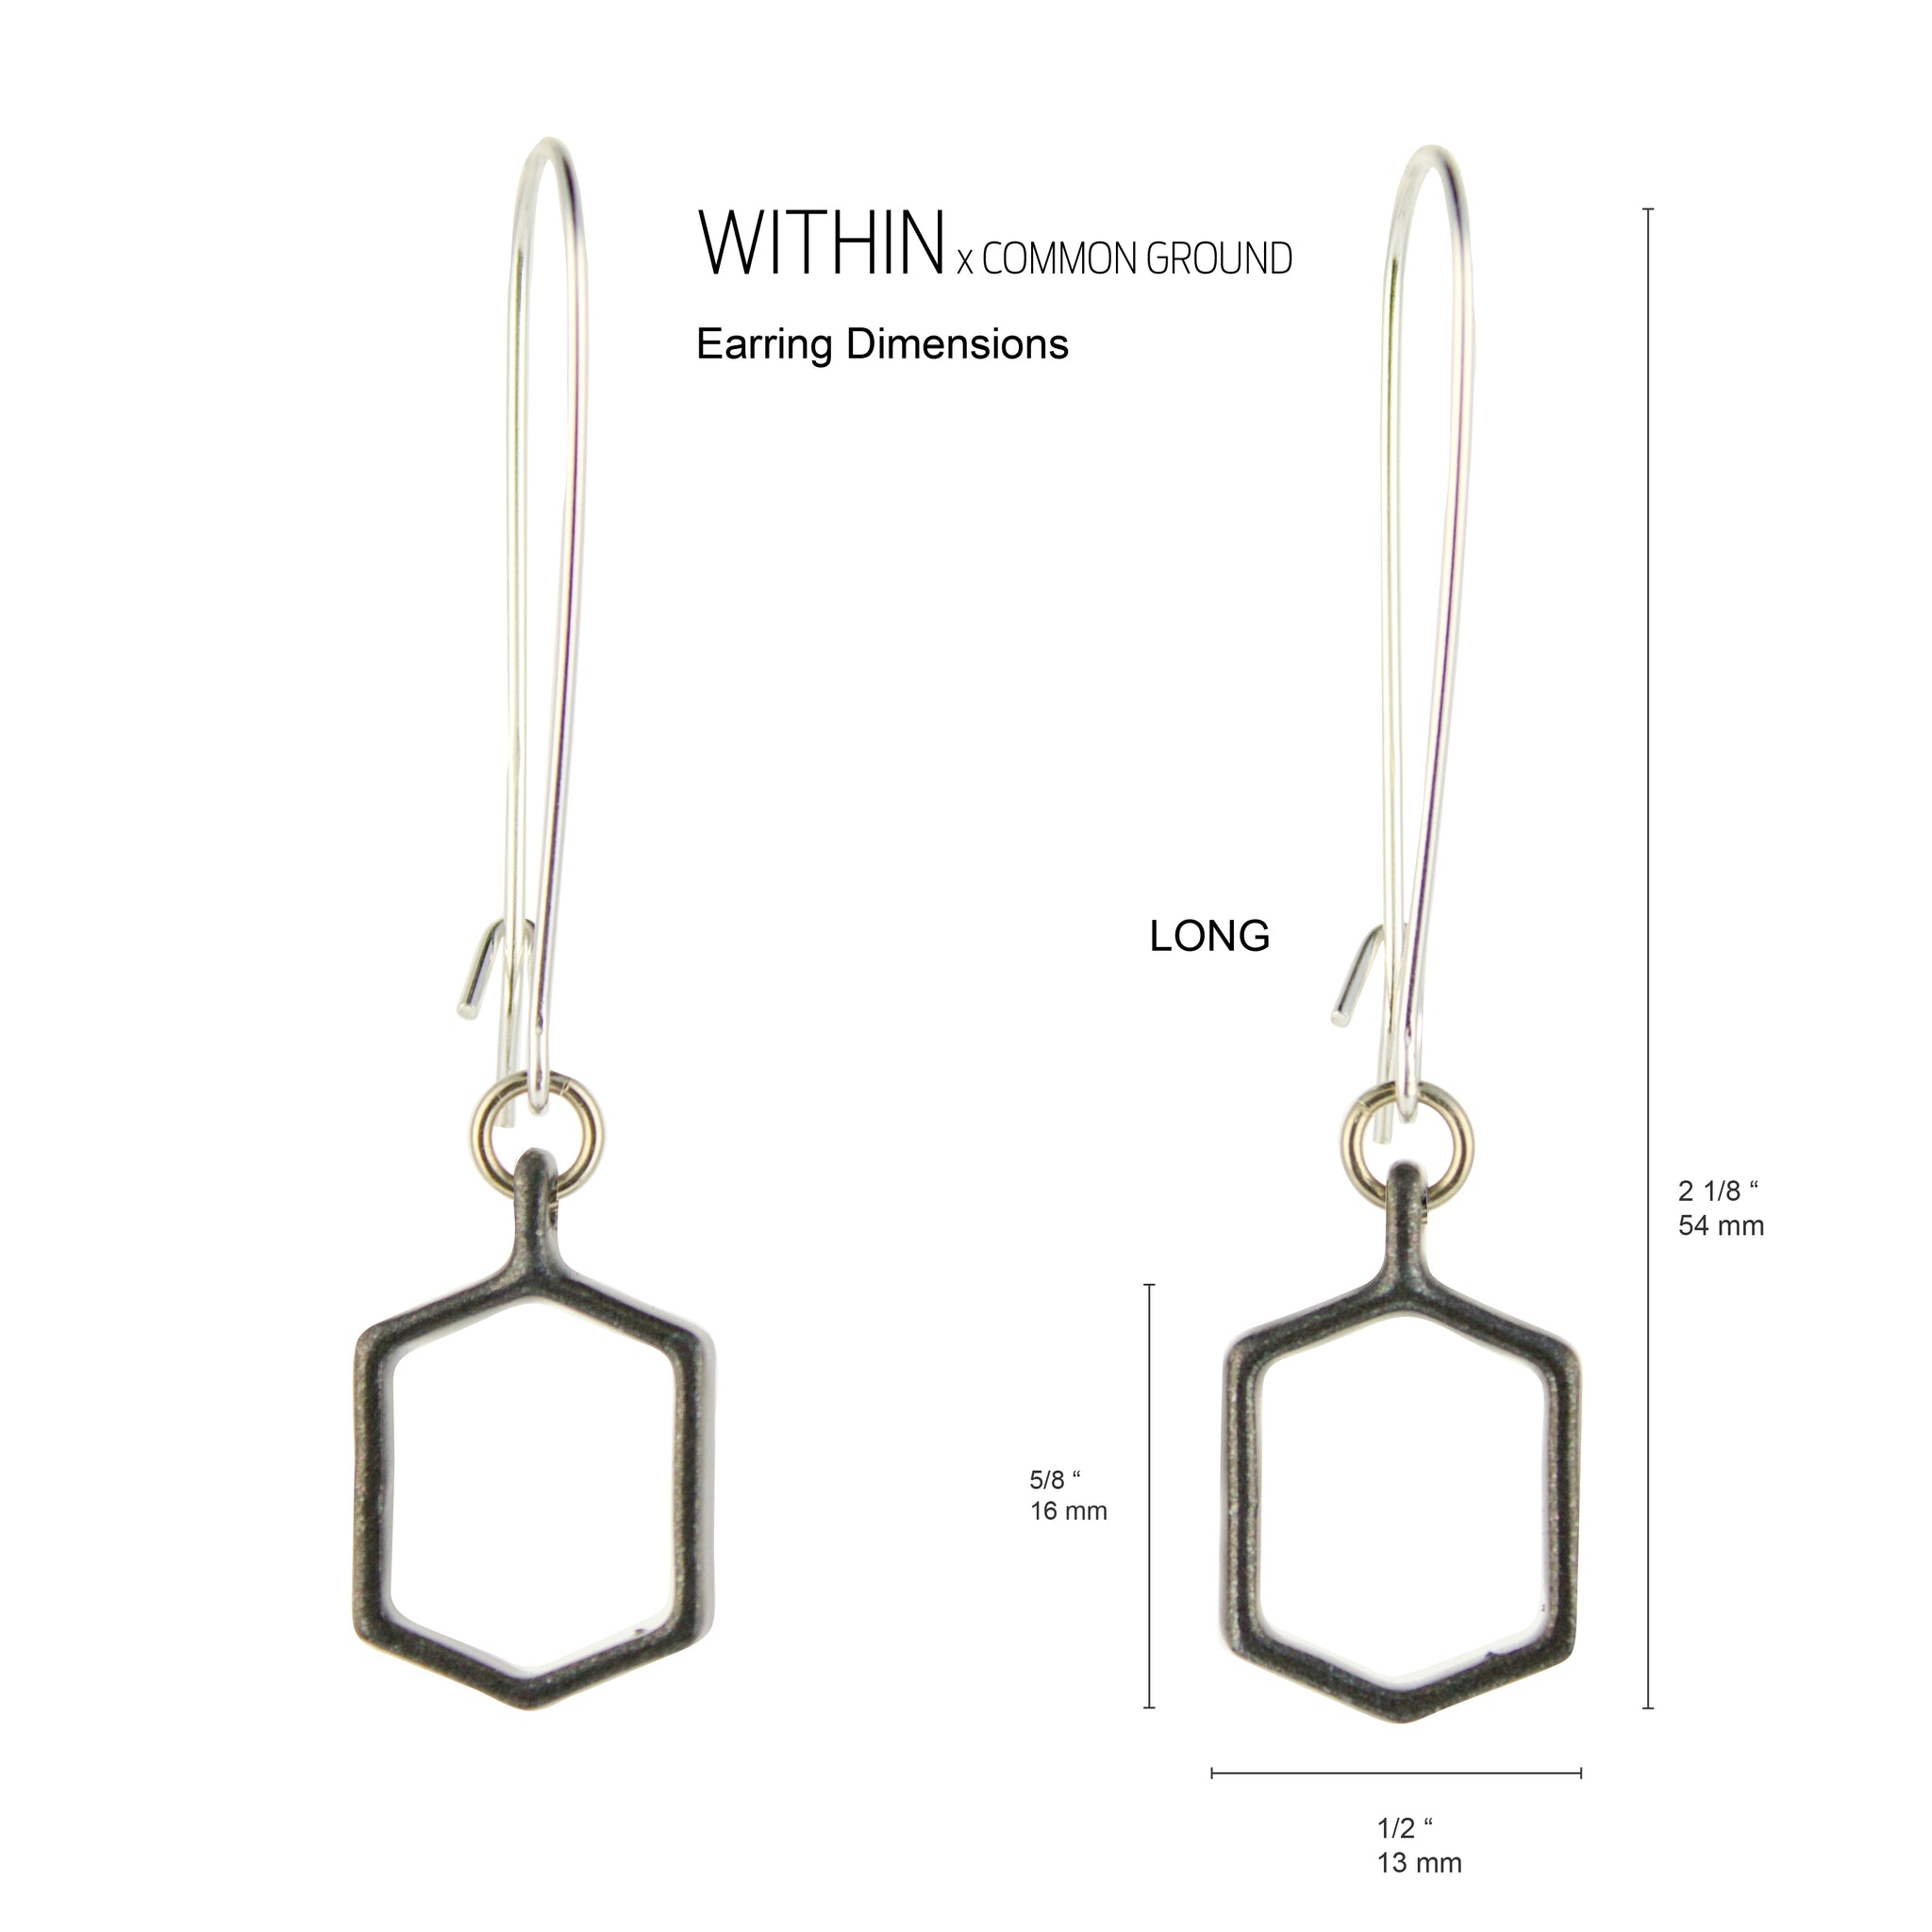 Alloy_Gray - WITHIN x COMMON GROUND Earring Dim View